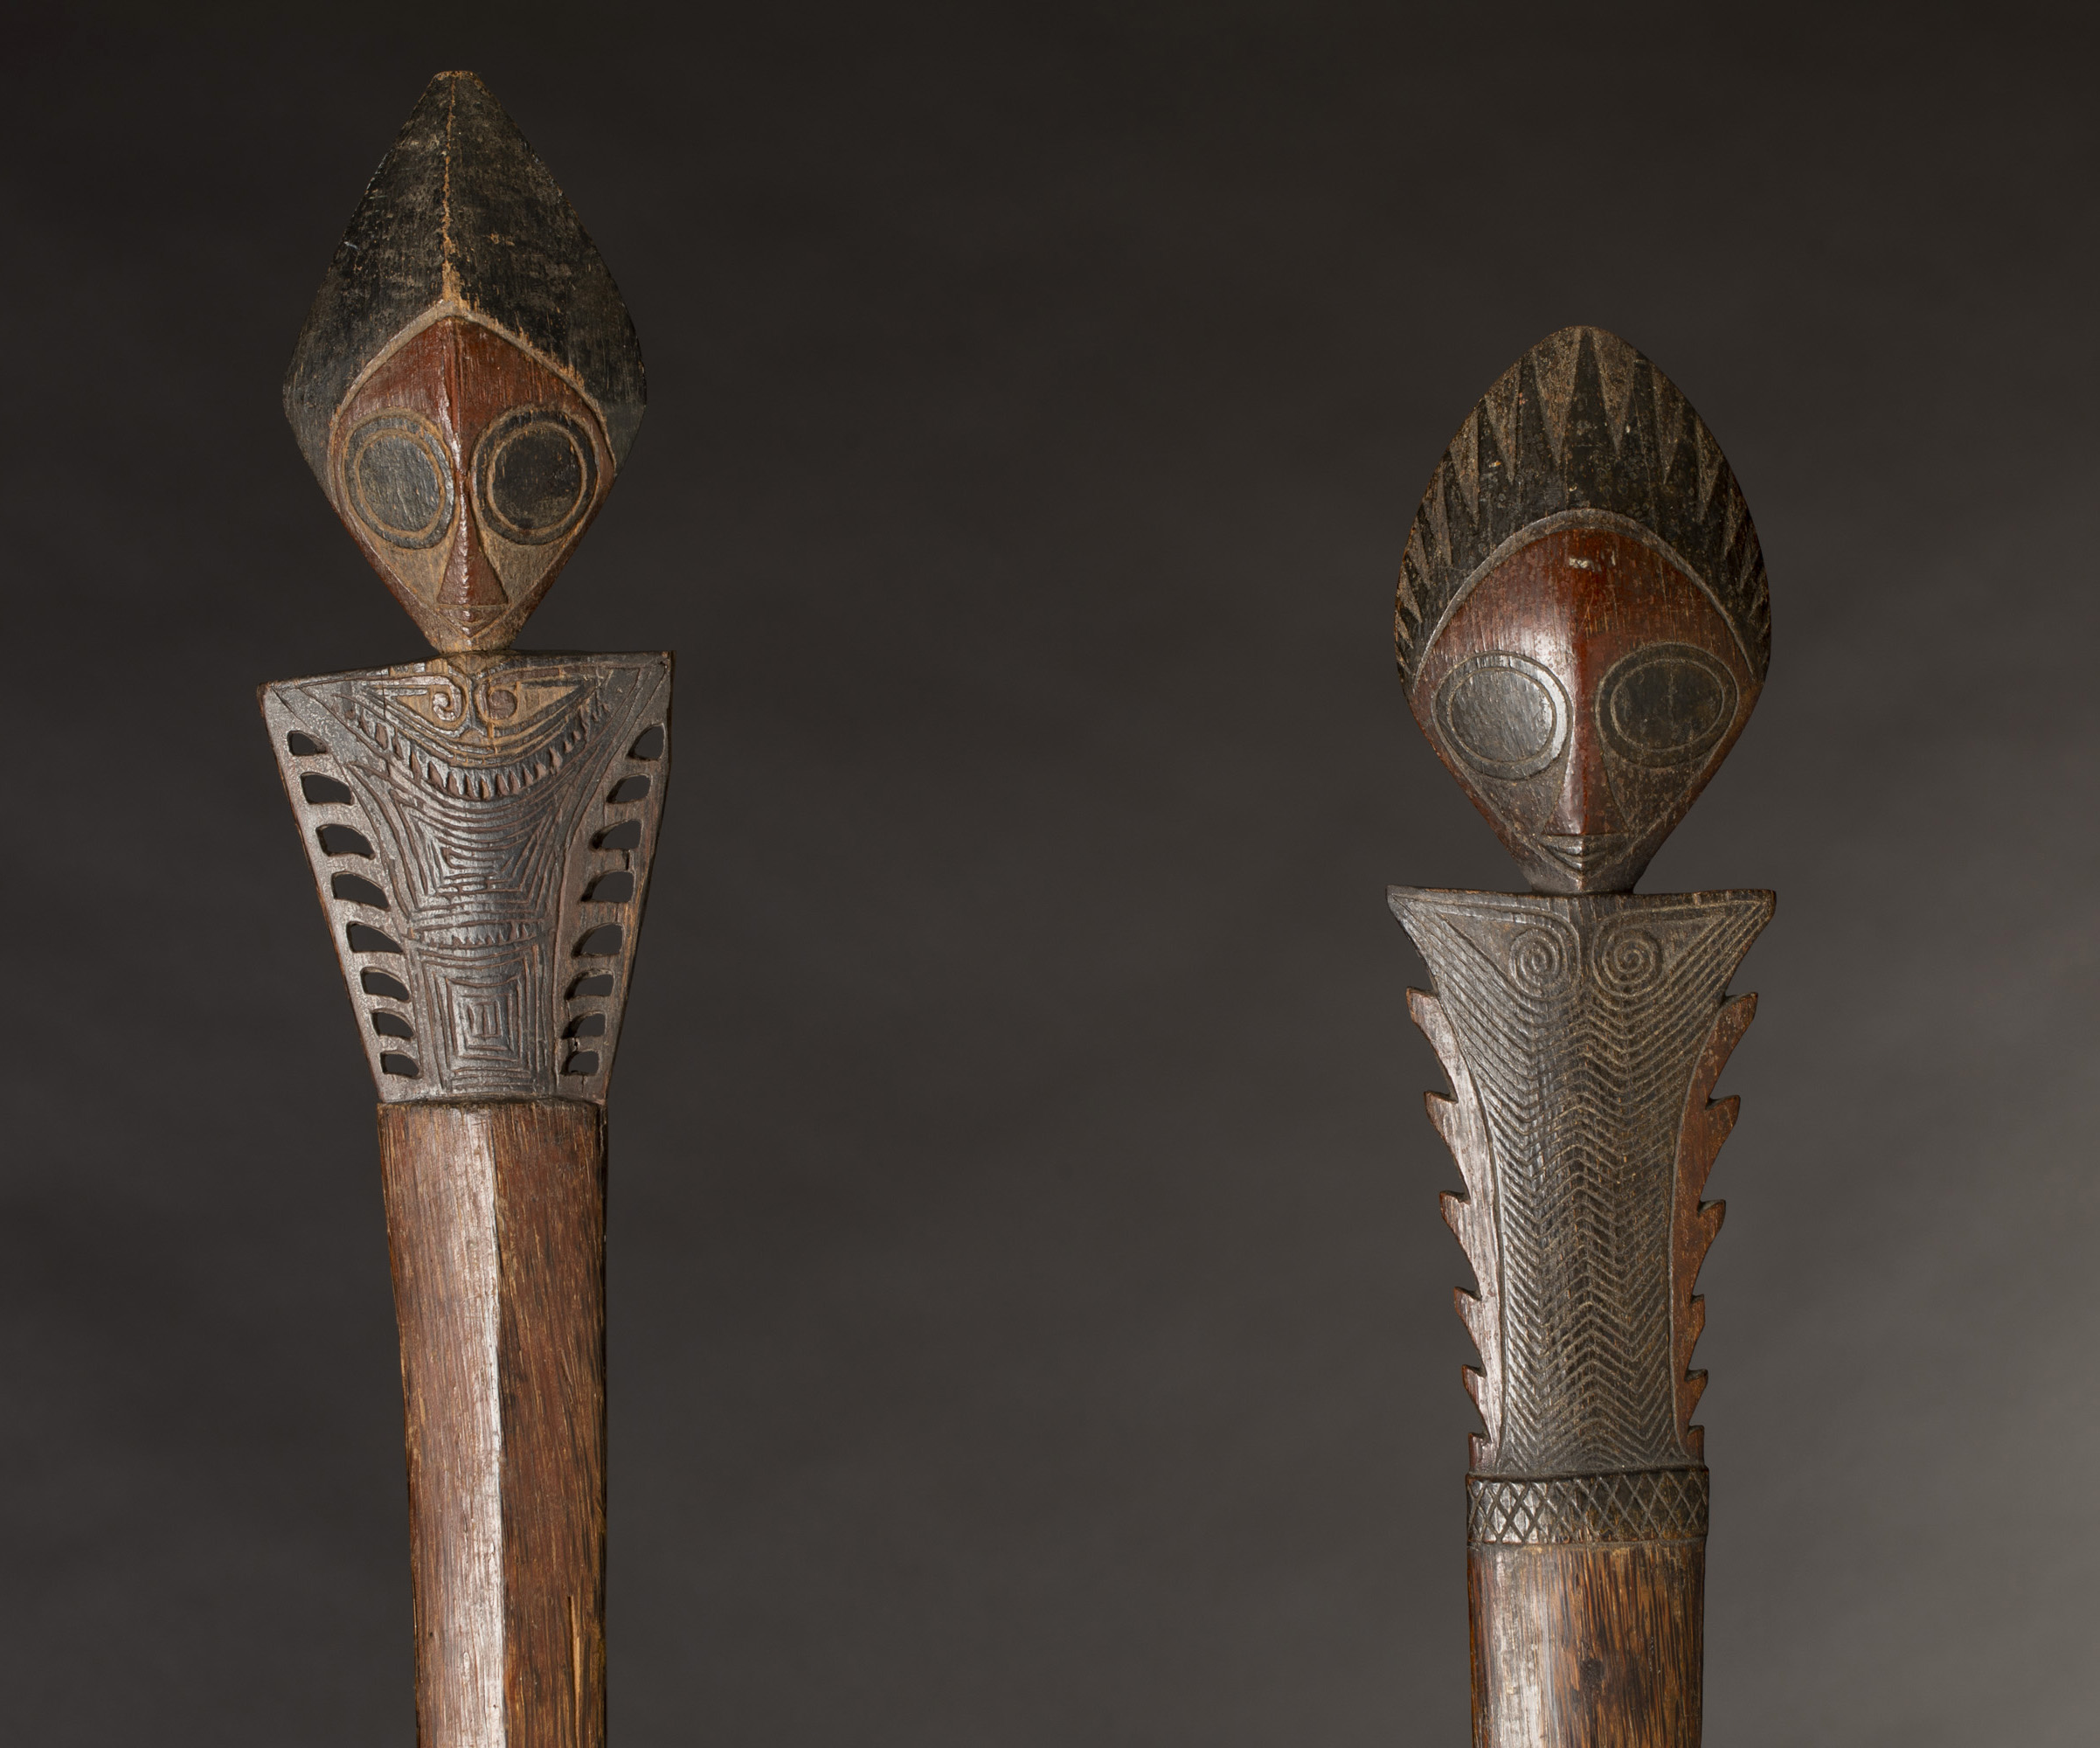 Pair of Dance Clubs Bougainville Island Papua New Guinea 19th Century